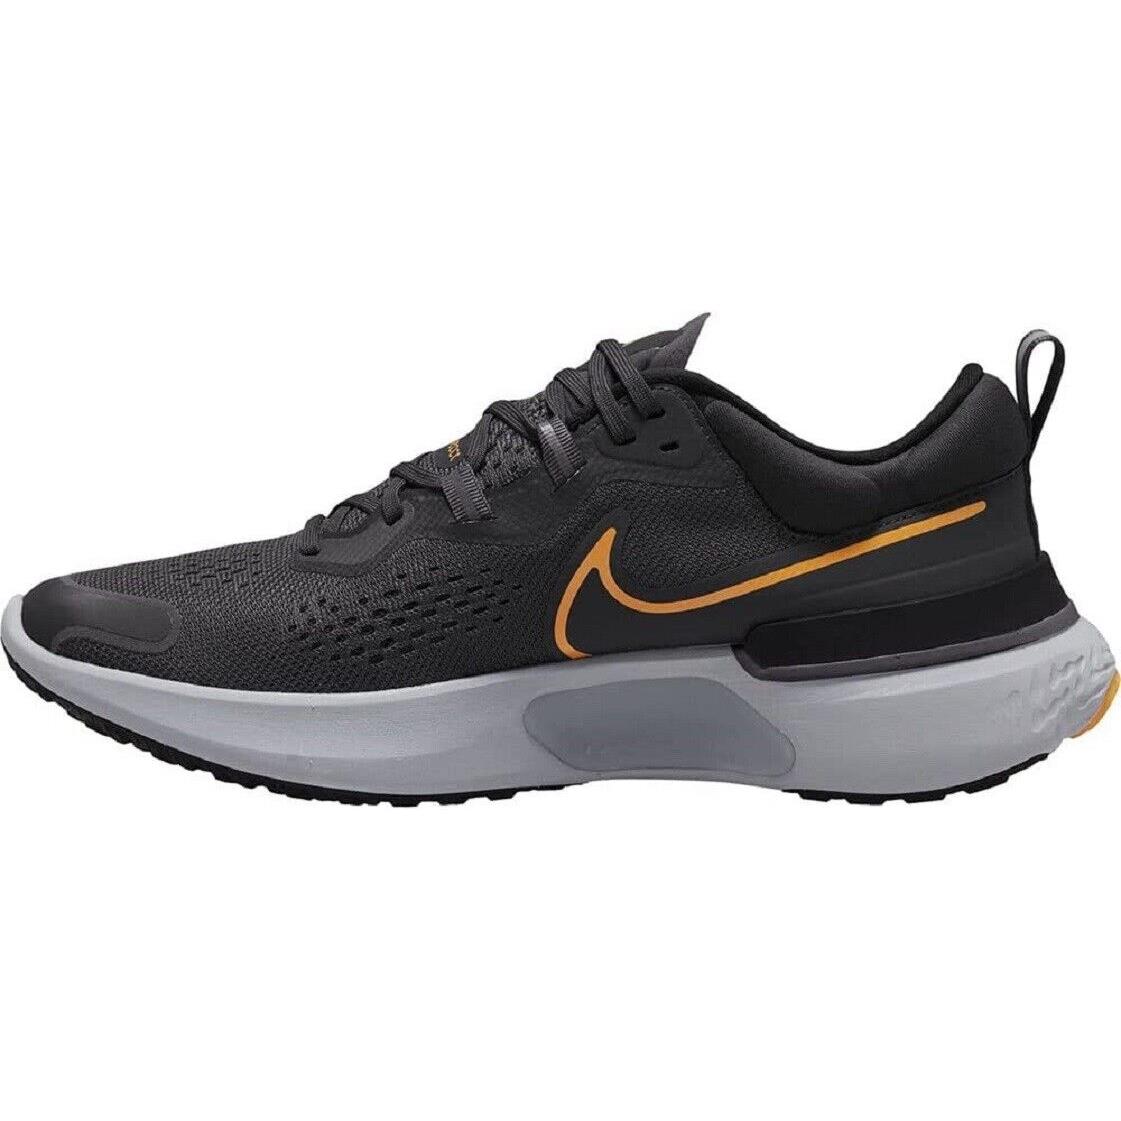 Nike Mens React Miler 2 Fitness Workout Running Shoes Size 10